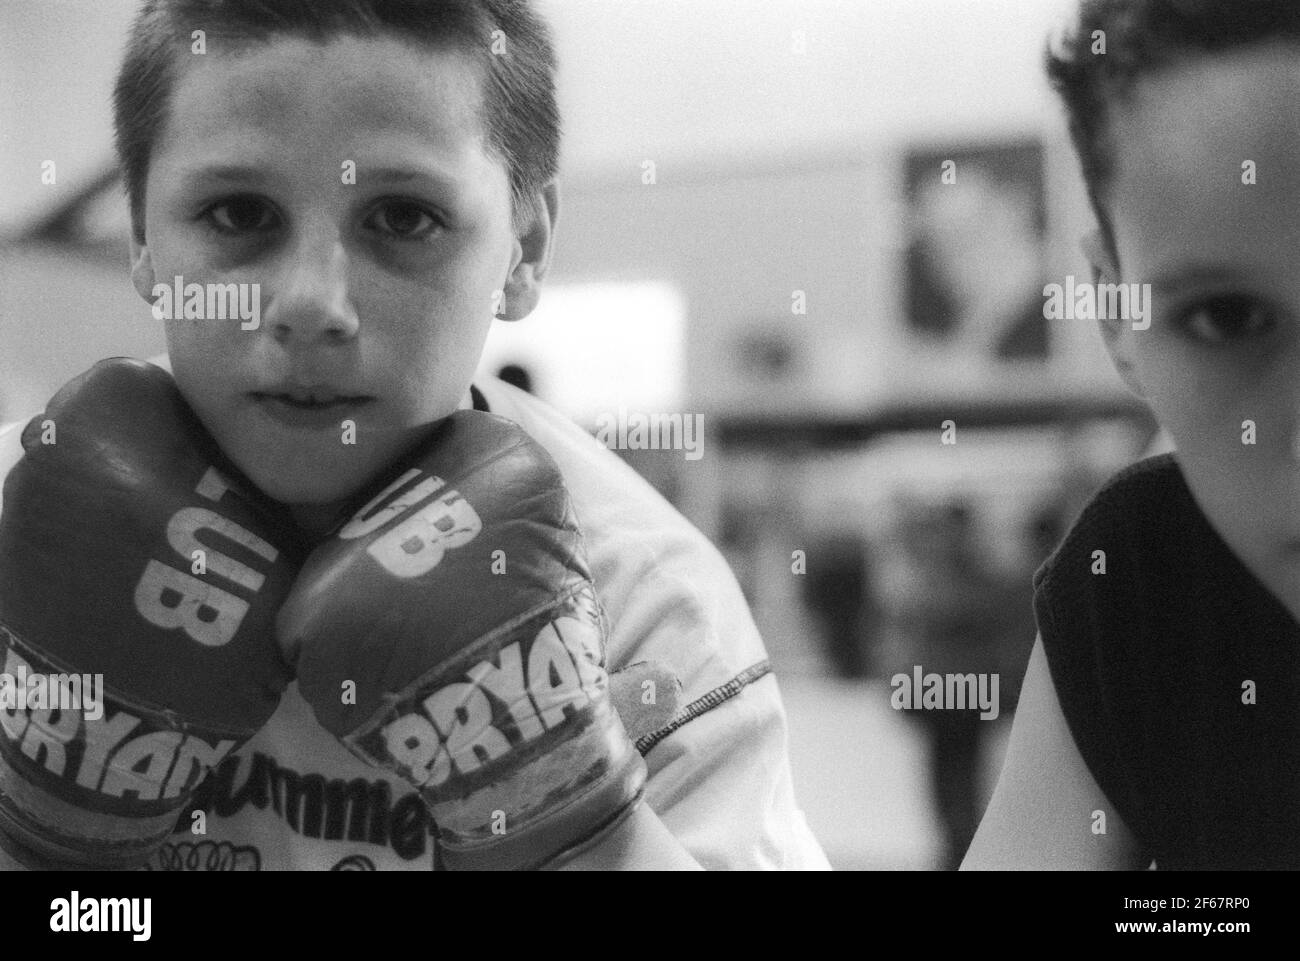 The ring boxing club Black and White Stock Photos & Images - Alamy